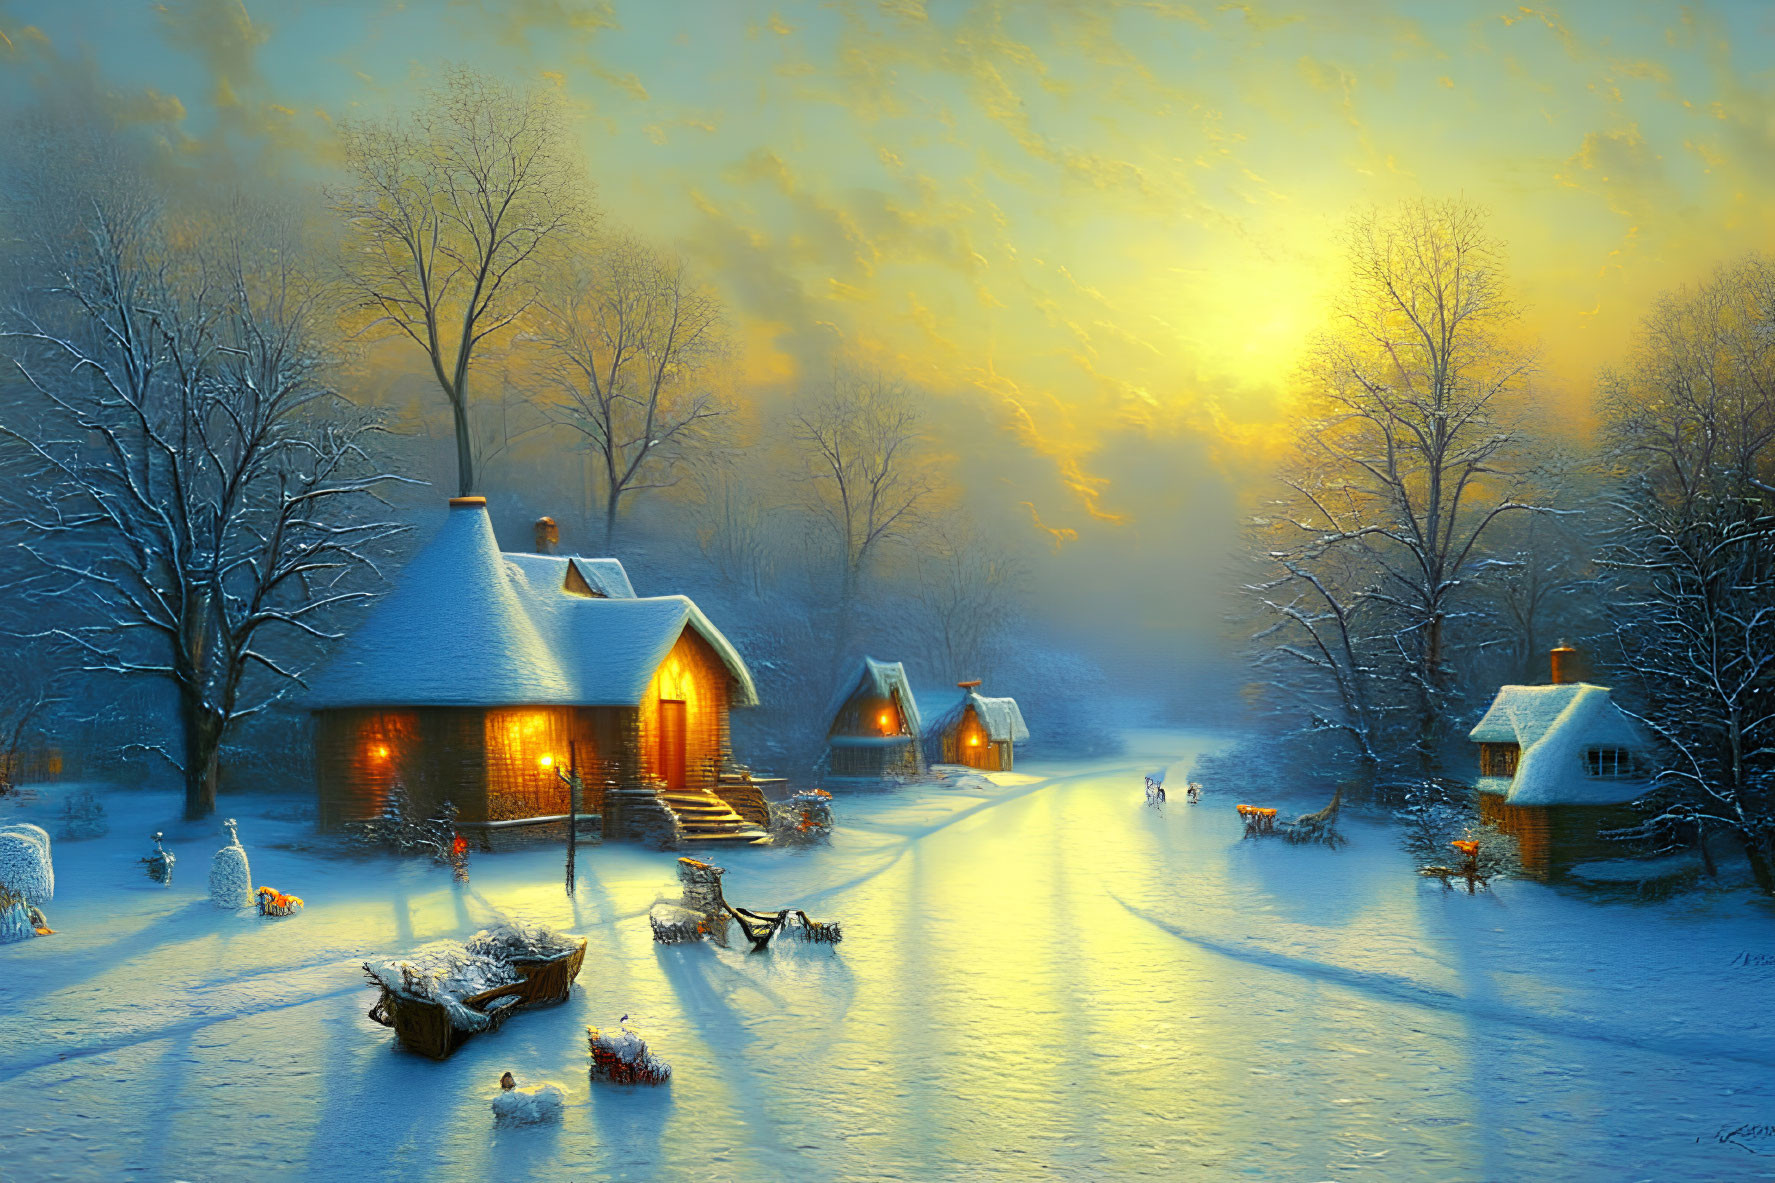 Snow-covered cottages in tranquil winter dusk scene